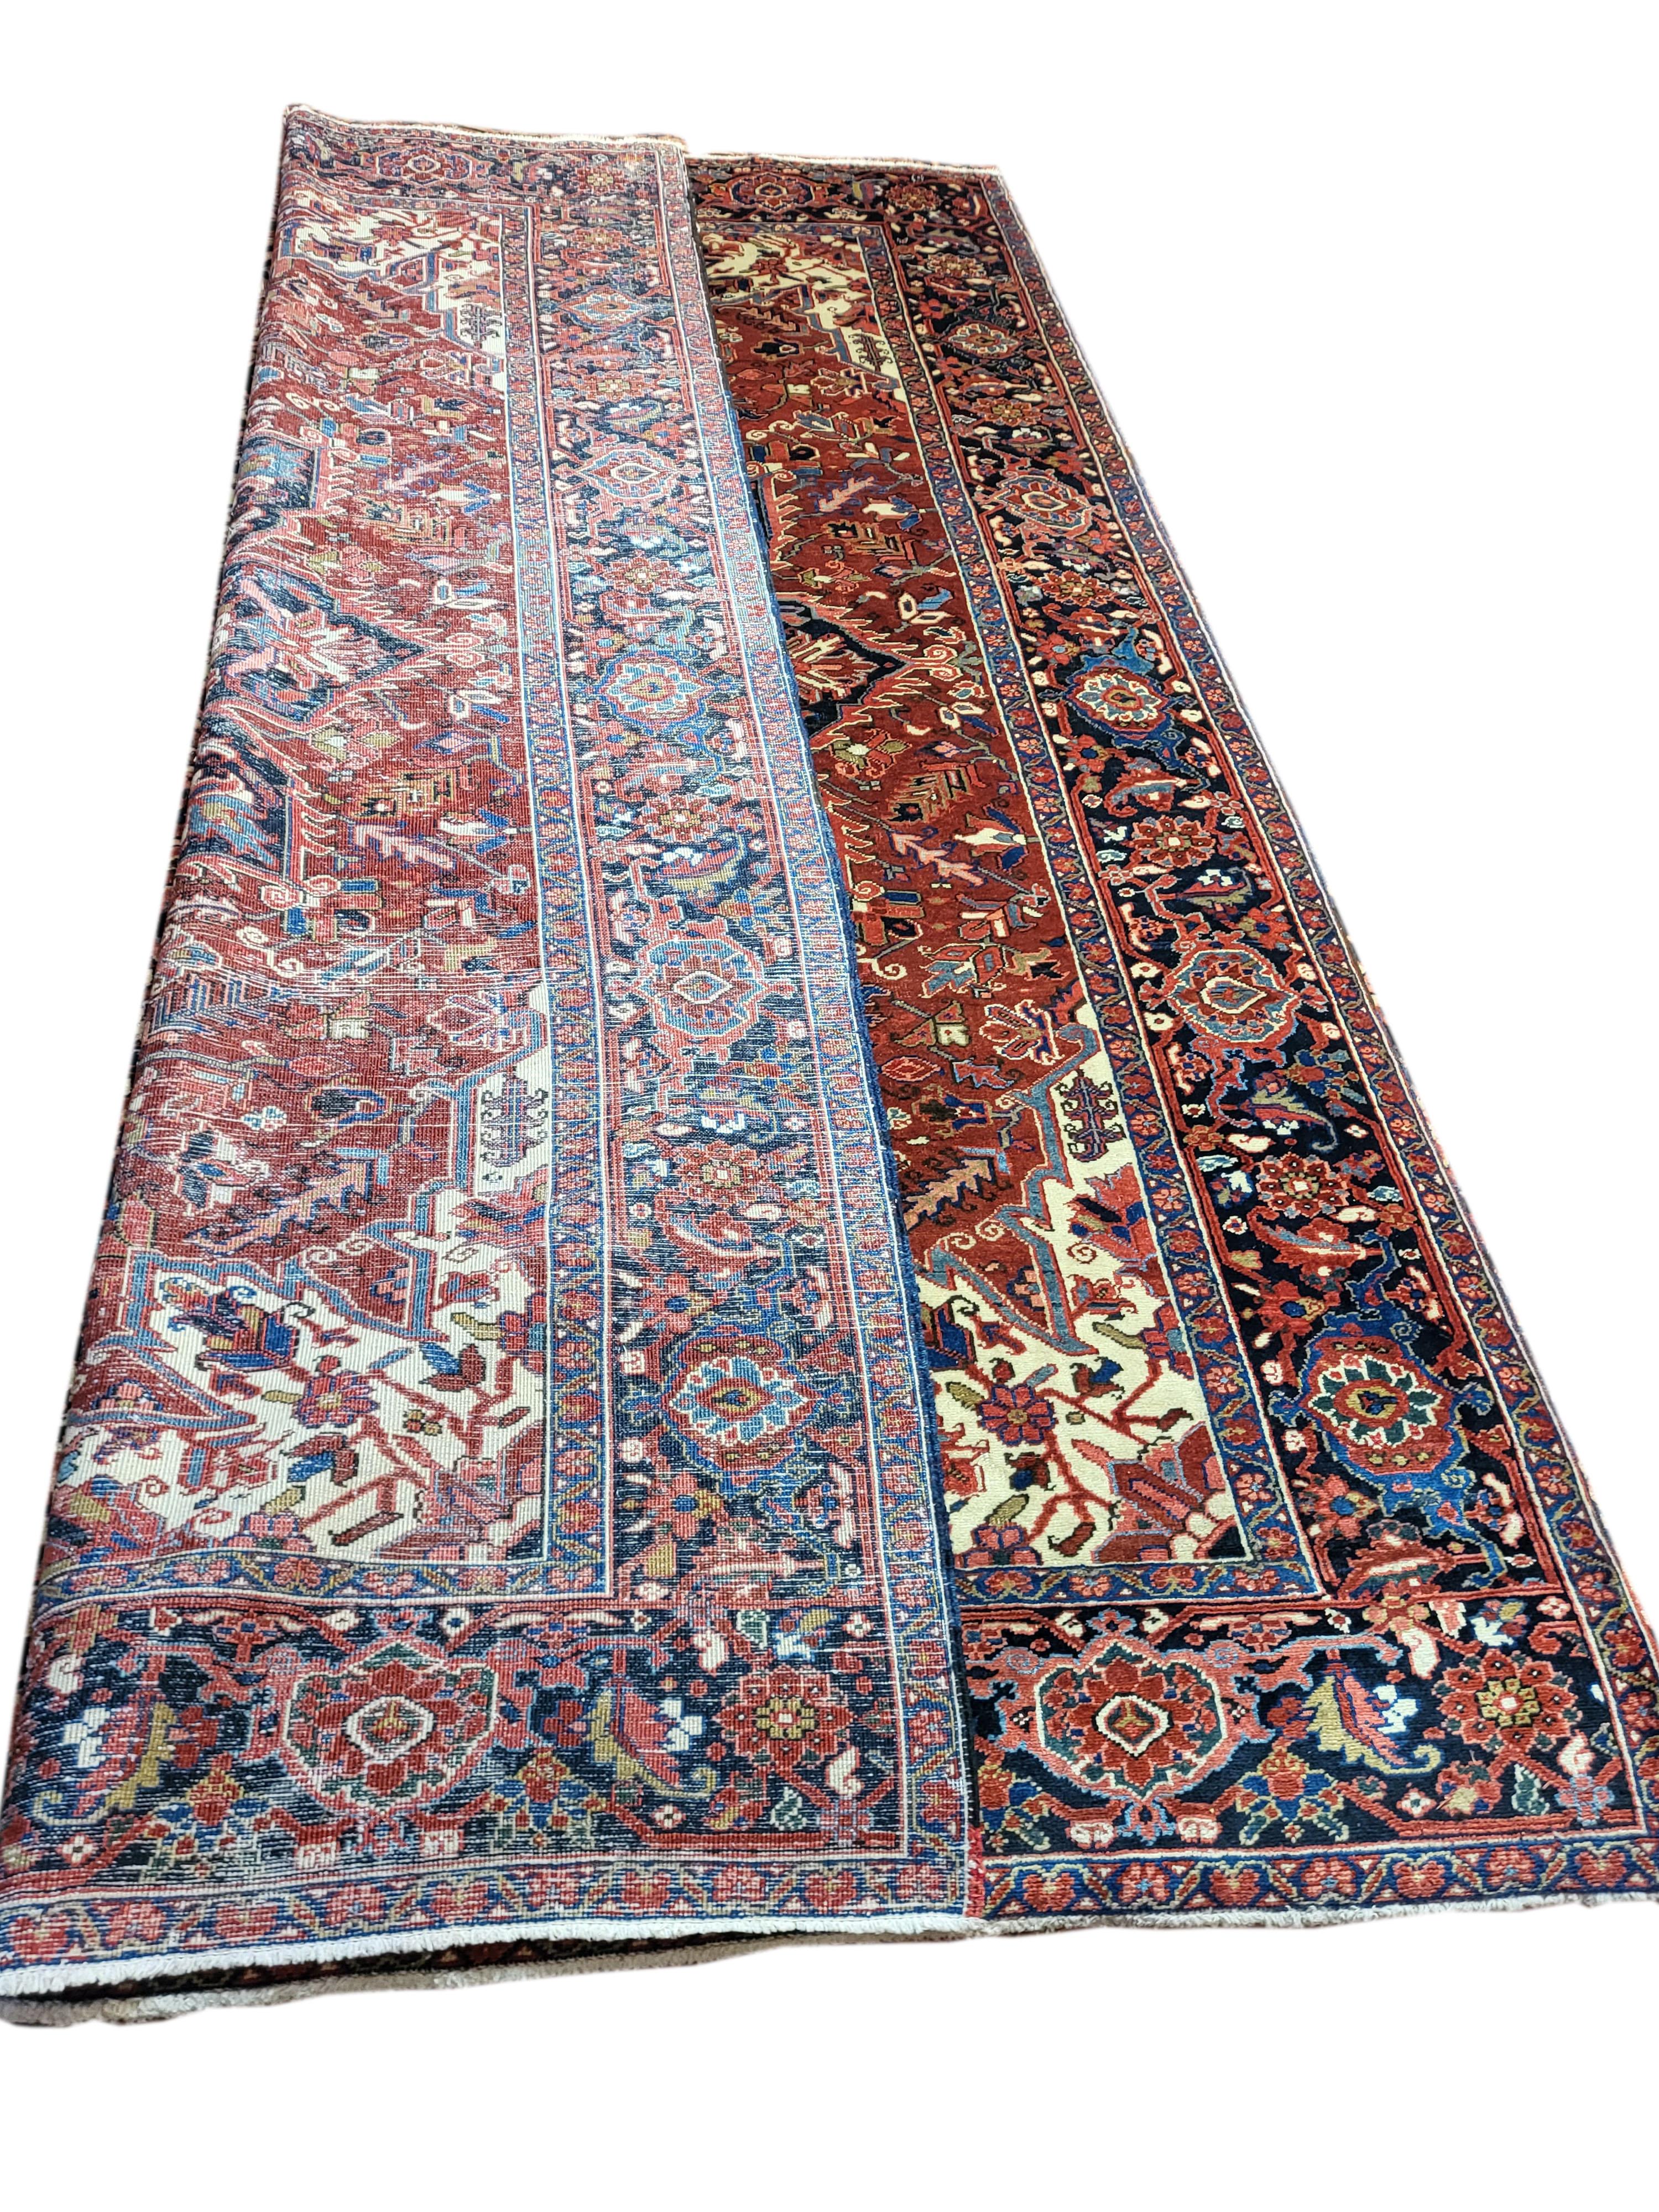 Breathtaking 7'6x11'4 60's Persian Heriz. This piece is an incredible example of how age defying these sturdy Heriz rugs are. The incredibly fine wool makes this piece iridescent and incredibly soft! The pile is full and luscious, so much so that